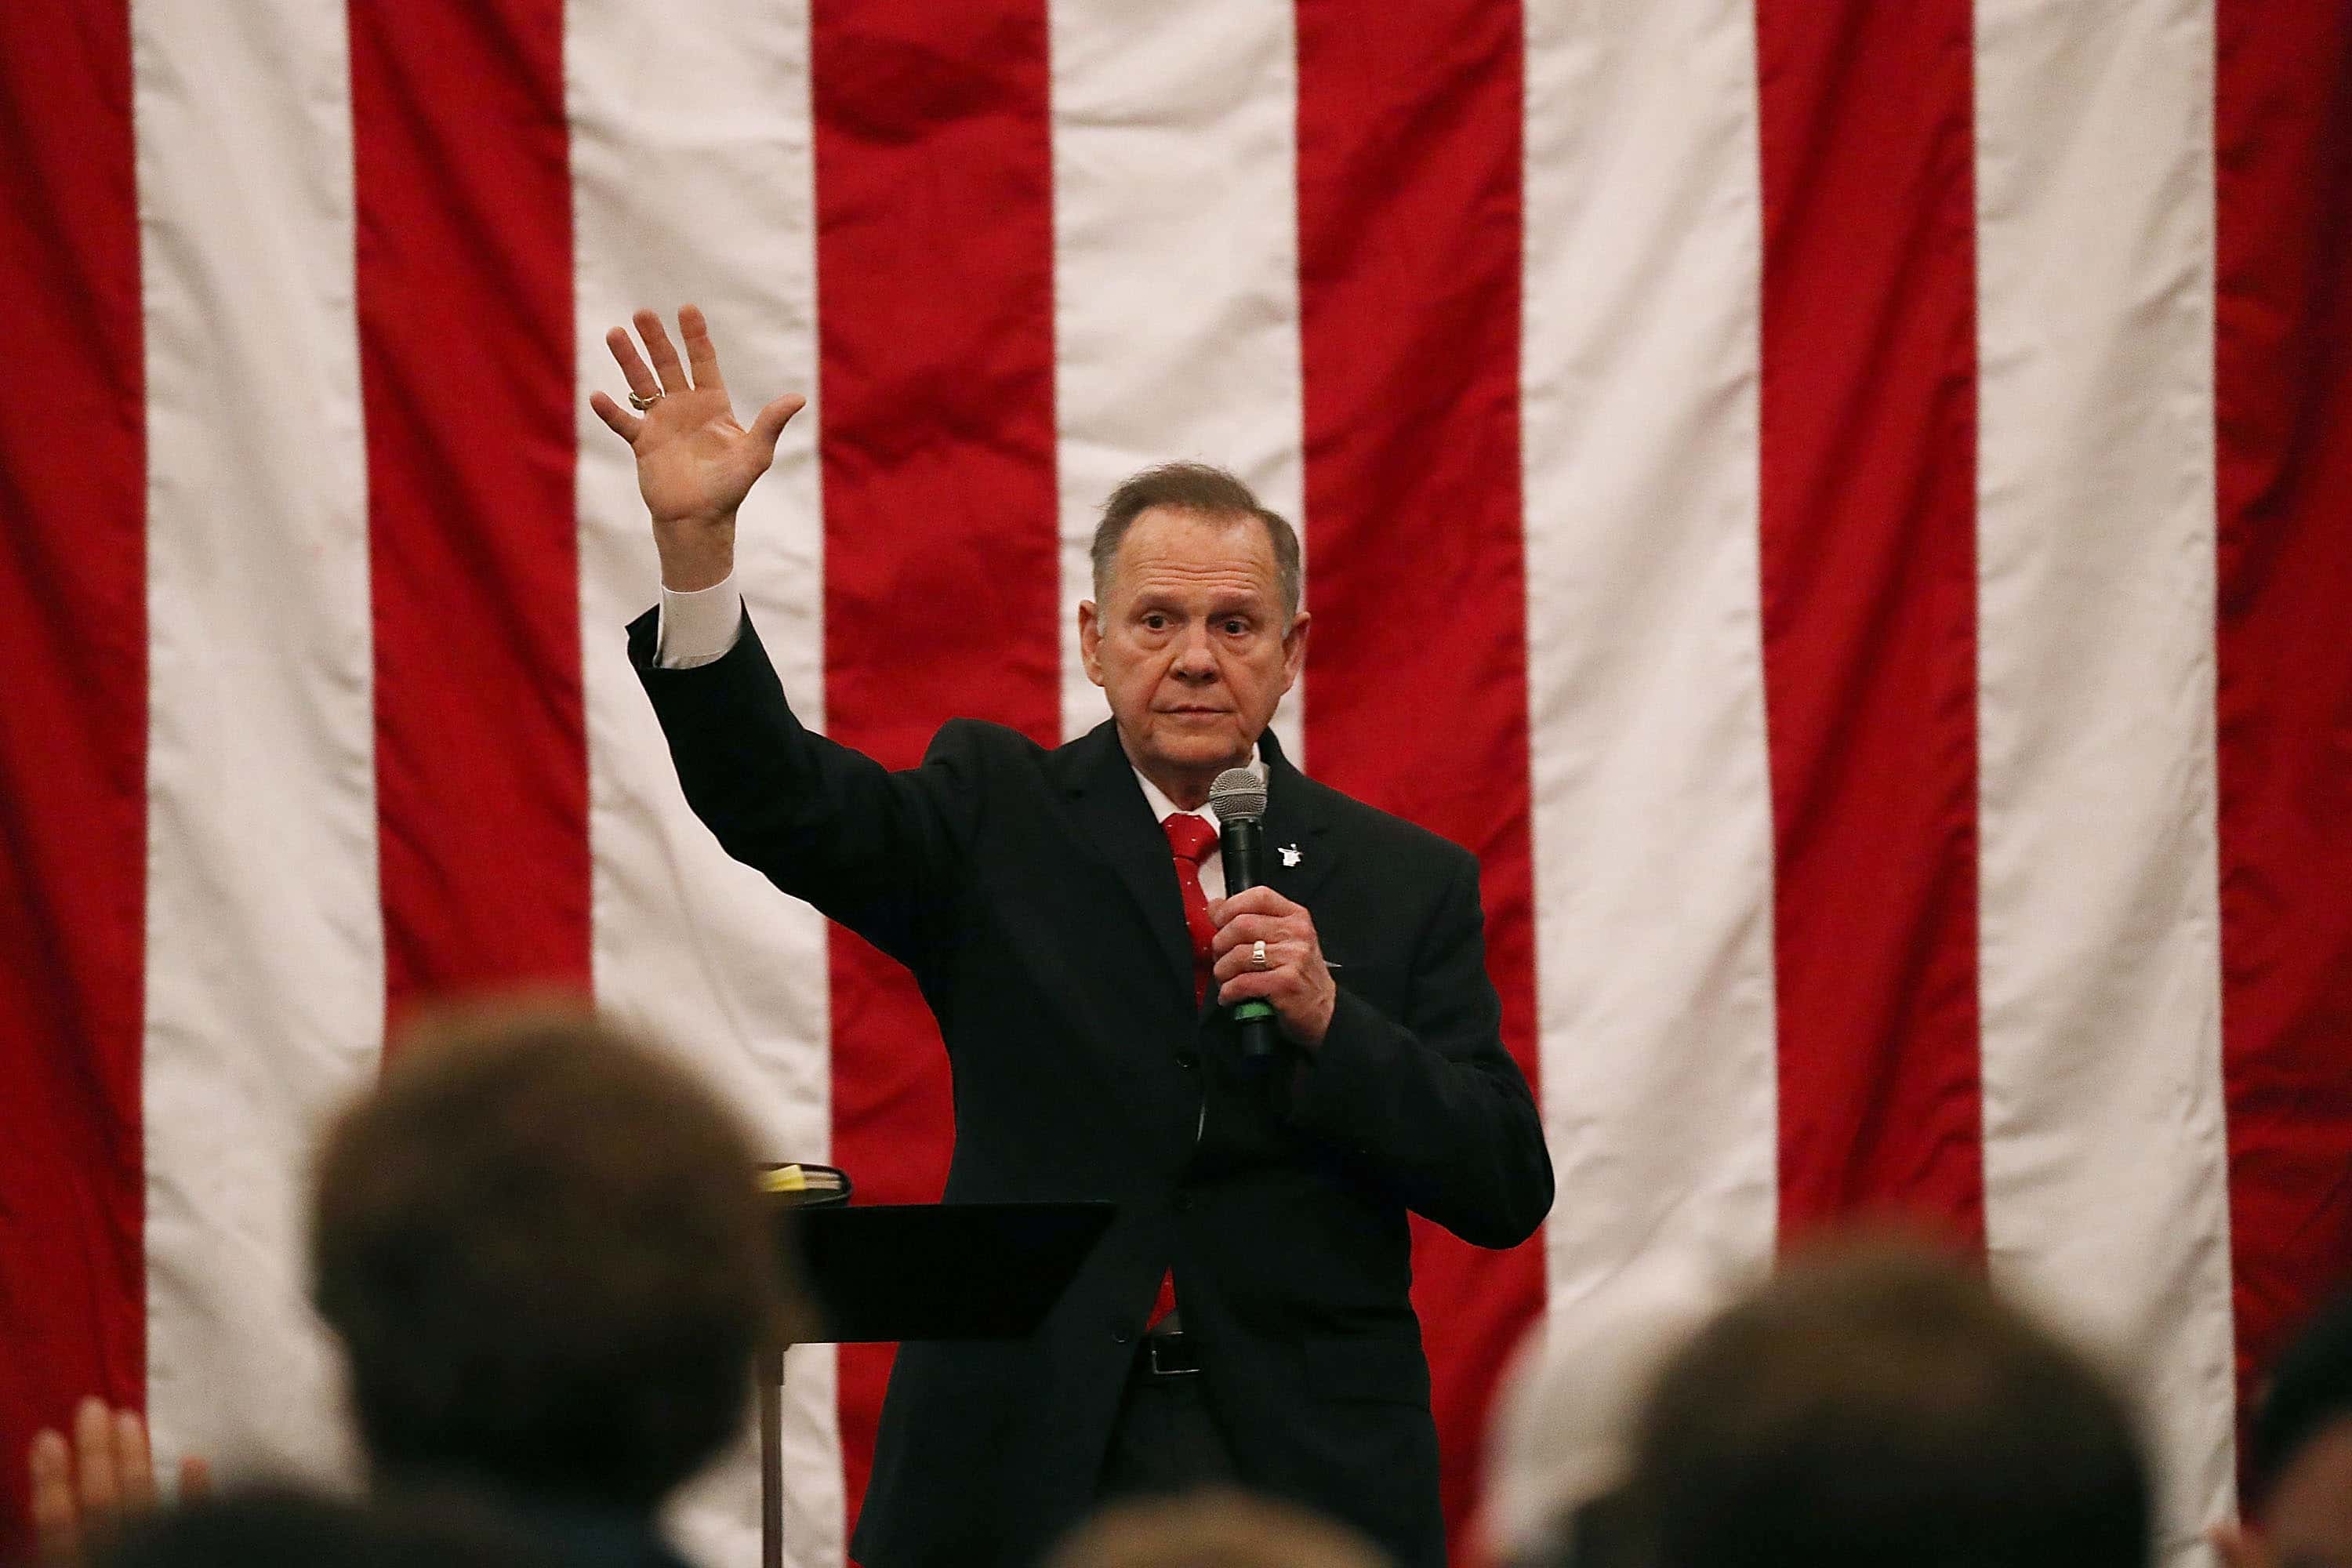 GOP Senate Candidate Judge Roy Moore Holds Rally On Eve Of Election